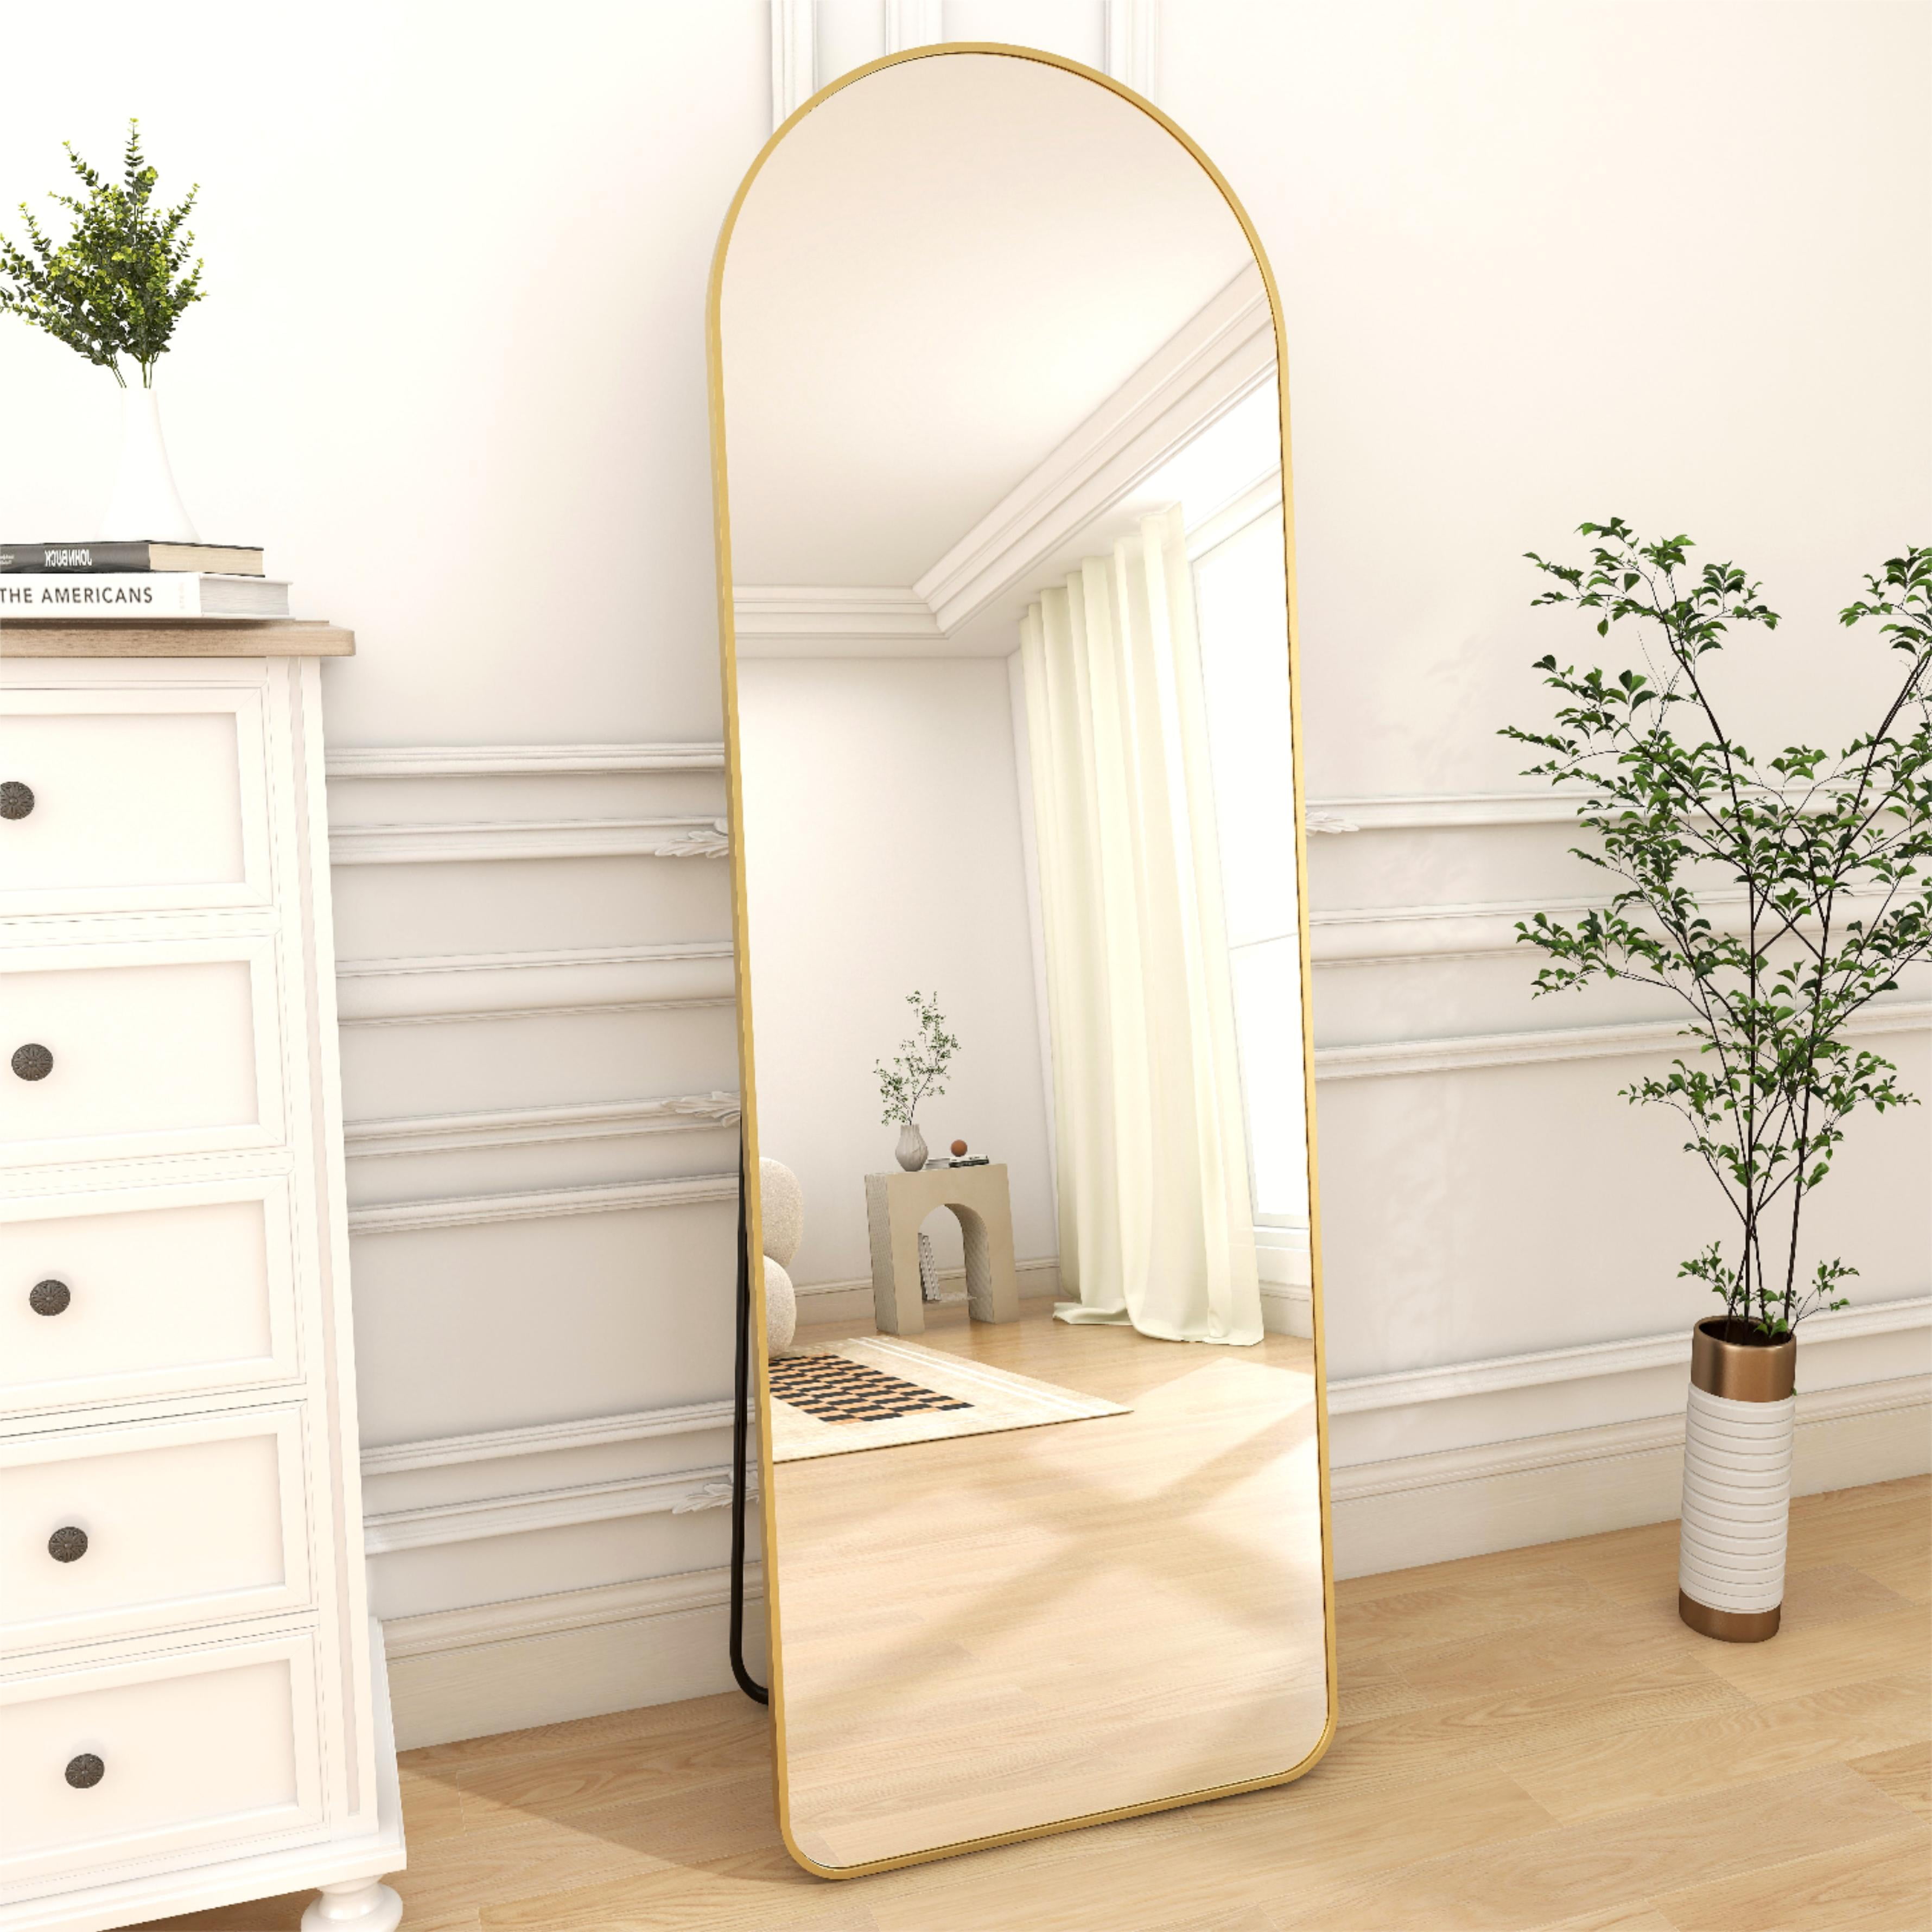 GLSLAND Full Length Mirror 22 x 65 Rounded Floor Mirror Standing Hanging  or Leaning Against Wall for Dressing Room, Bedroom, Gold